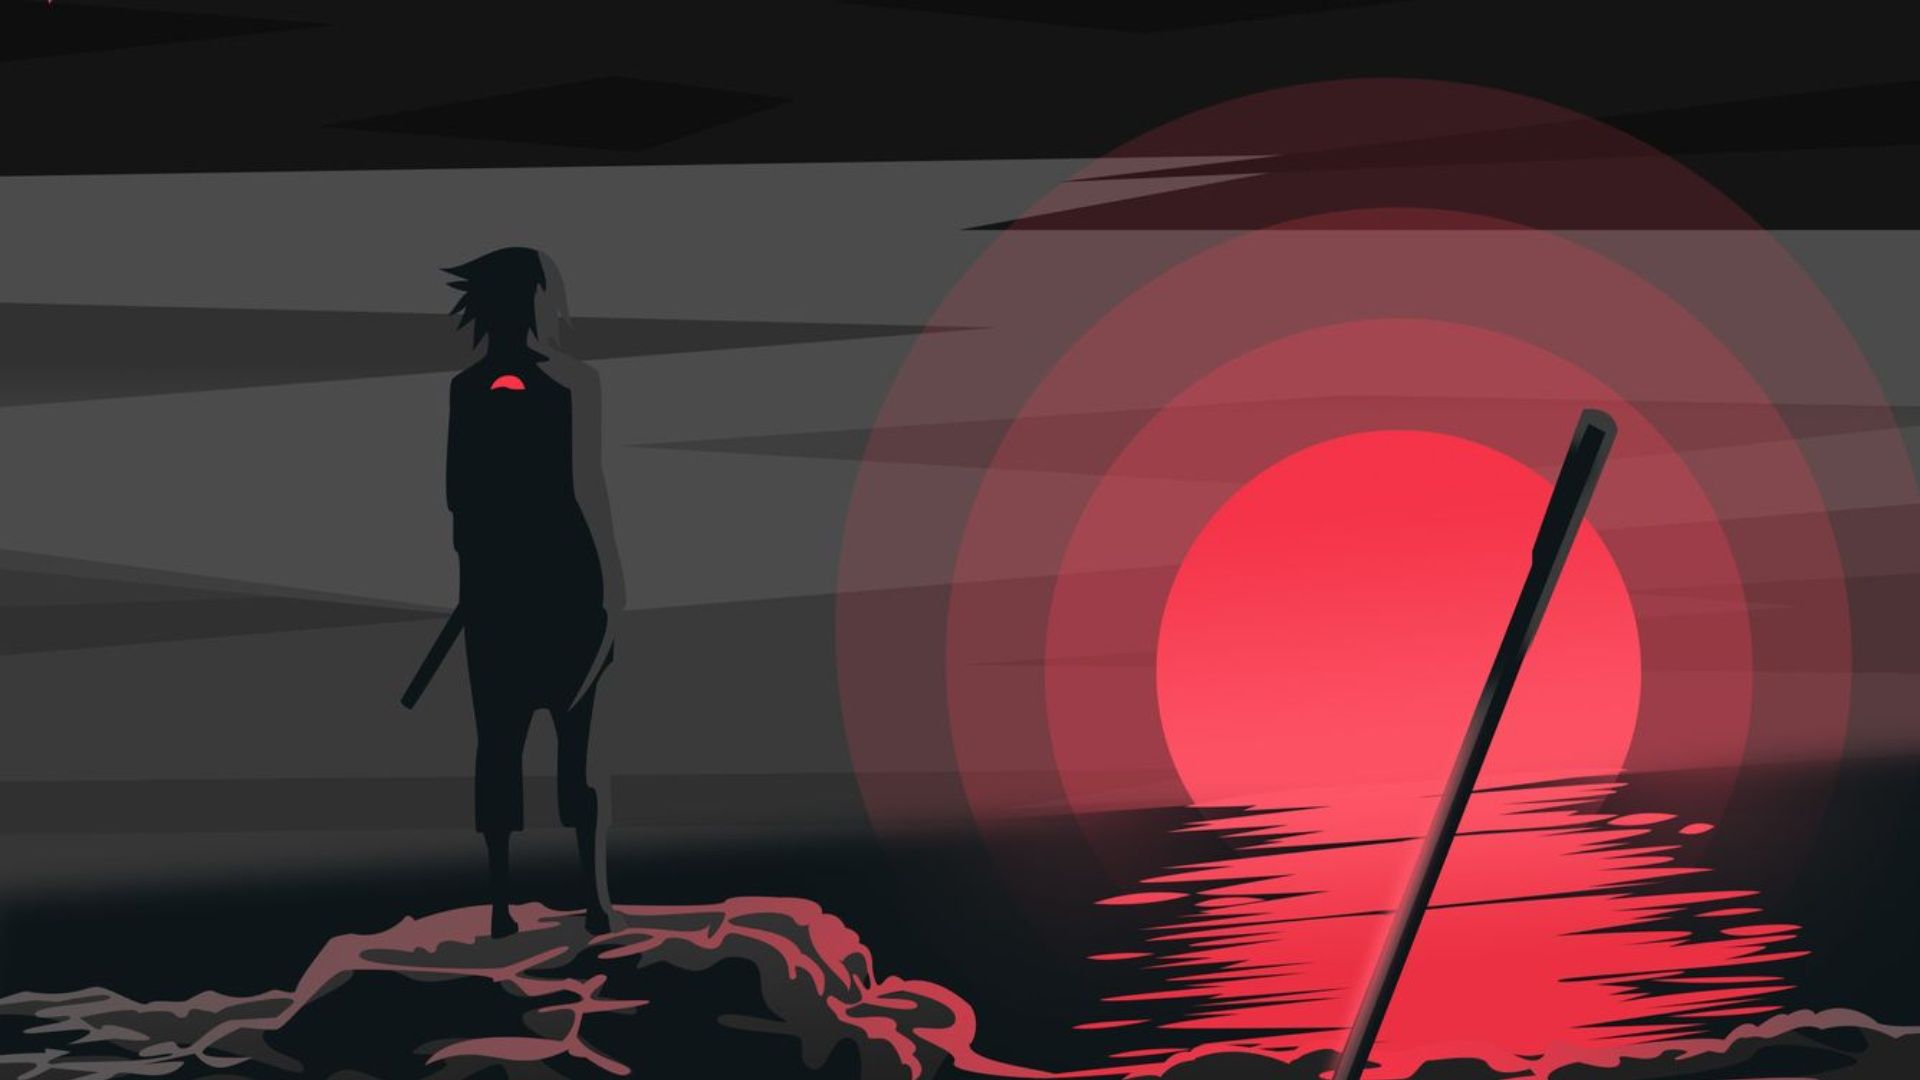 A silhouette of a person standing on a rock in front of a red sun - Sasuke Uchiha